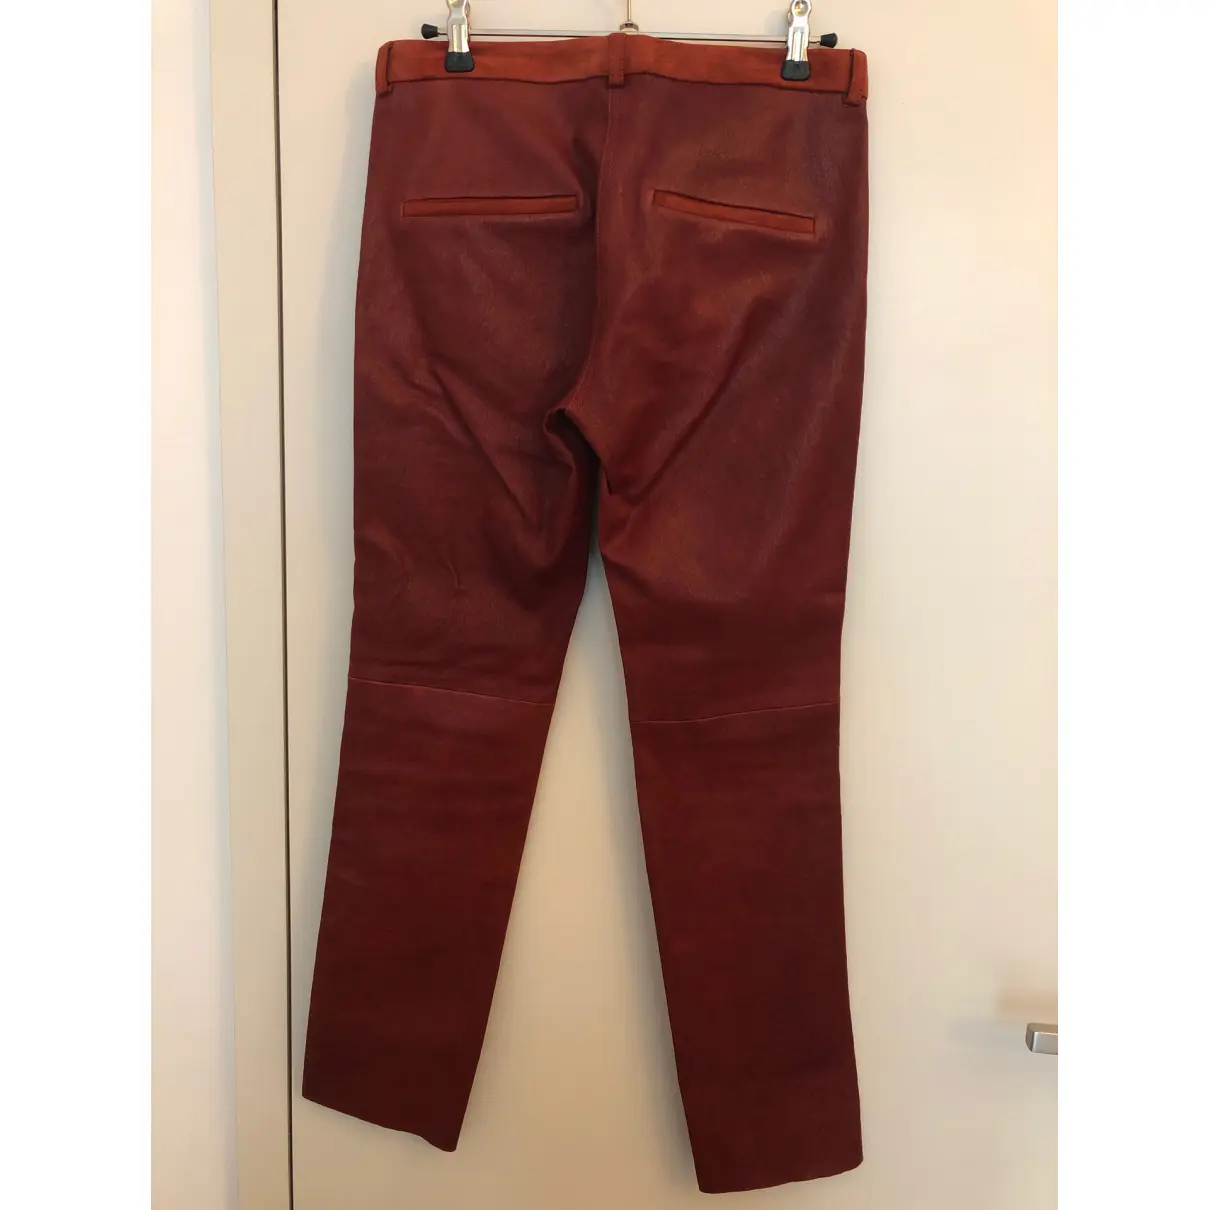 Buy Isabel Marant Leather straight pants online